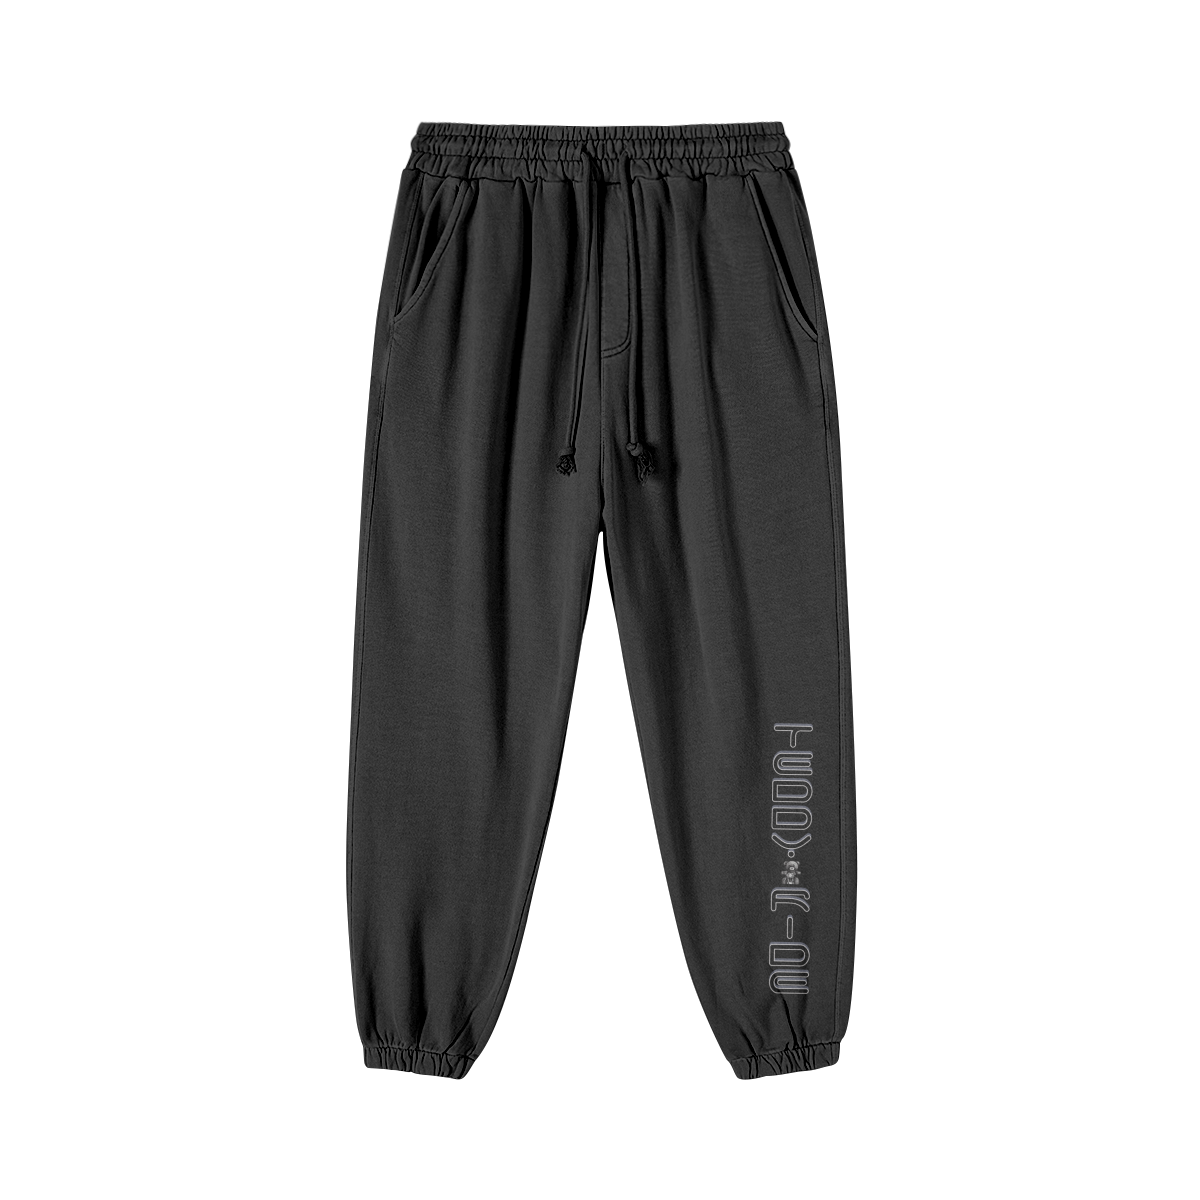 Black - Teddy Ride 420GSM Unisex Super Heavyweight Washed Baggy Sweatpants - unisex sweatpants at TFC&H Co.